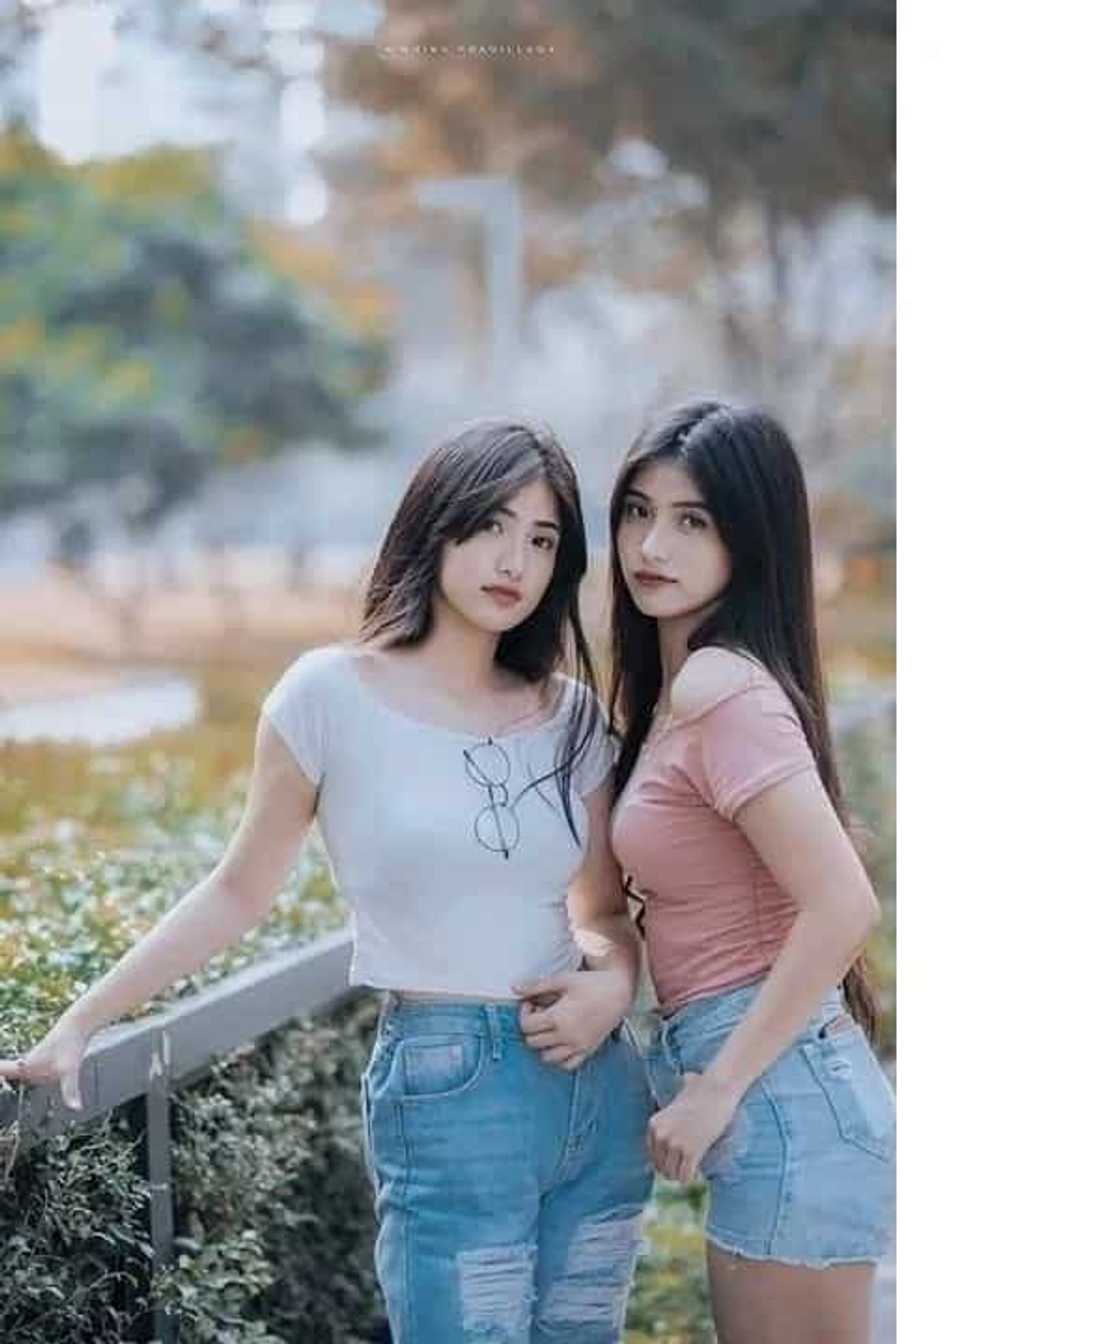 Humanga talaga ang netizens sa ganda nila! Lumen's twins from the iconic Surf commercial are all grown up